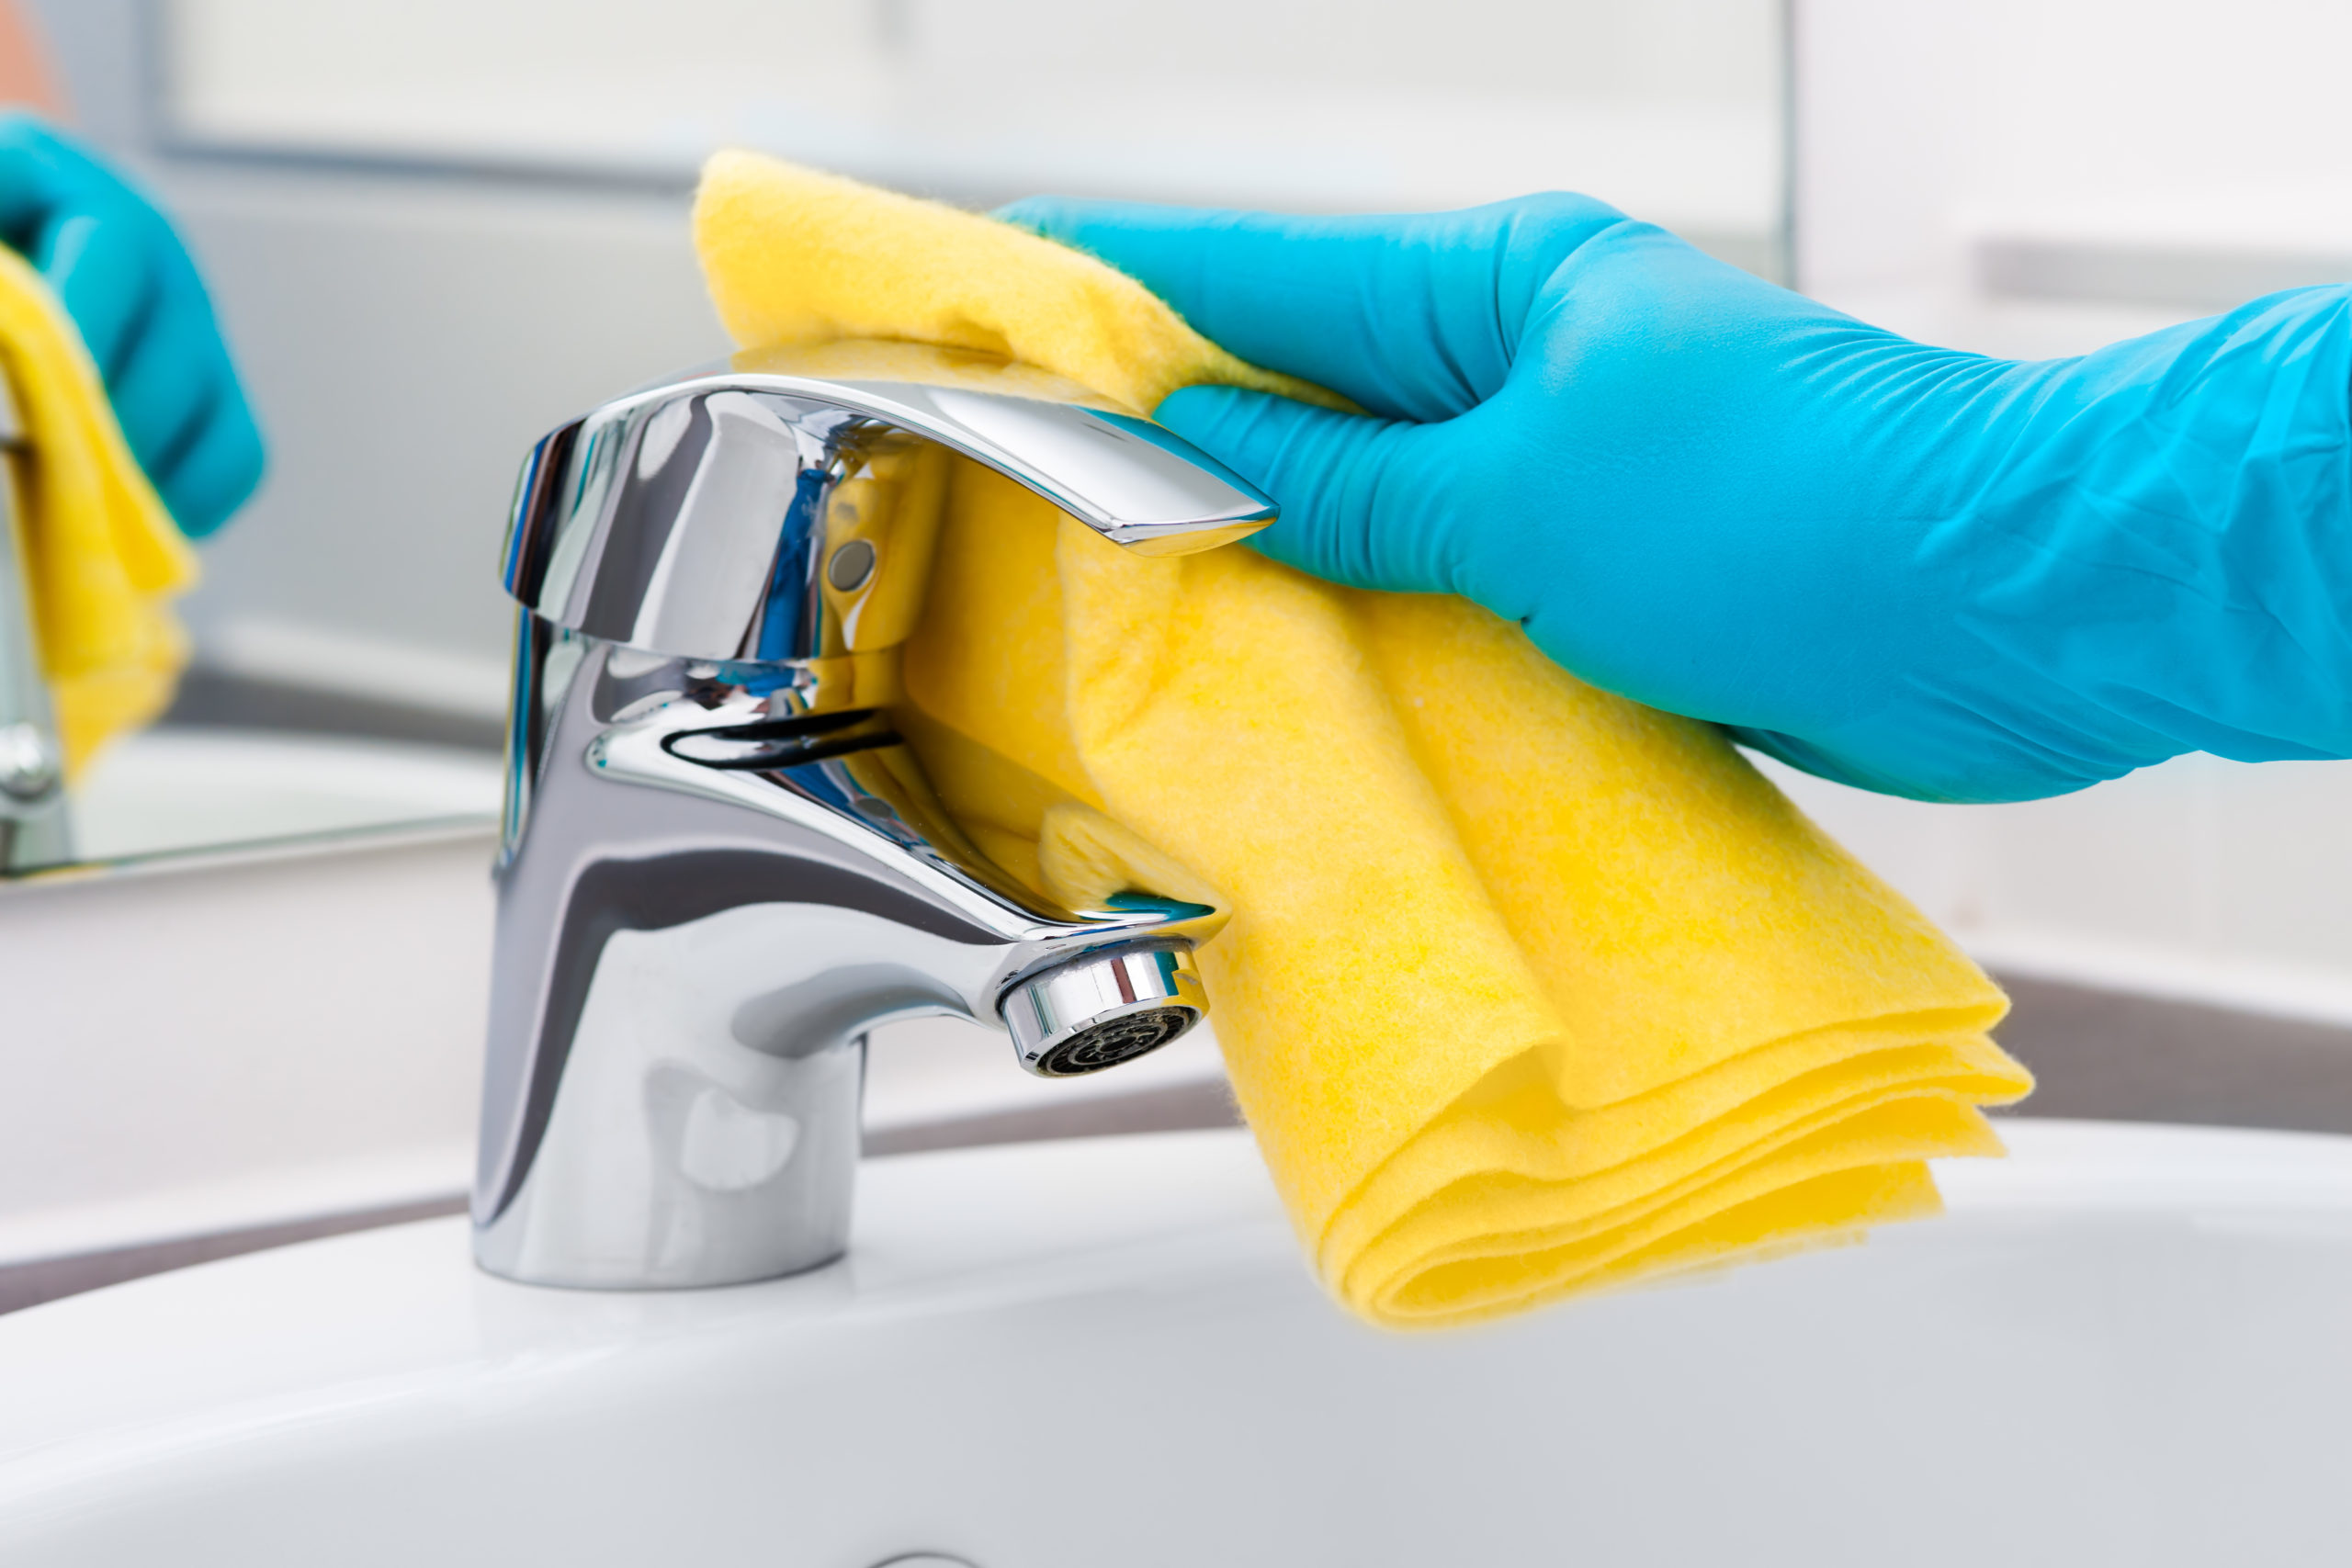 Person wearing gloves cleaning bathroom faucet